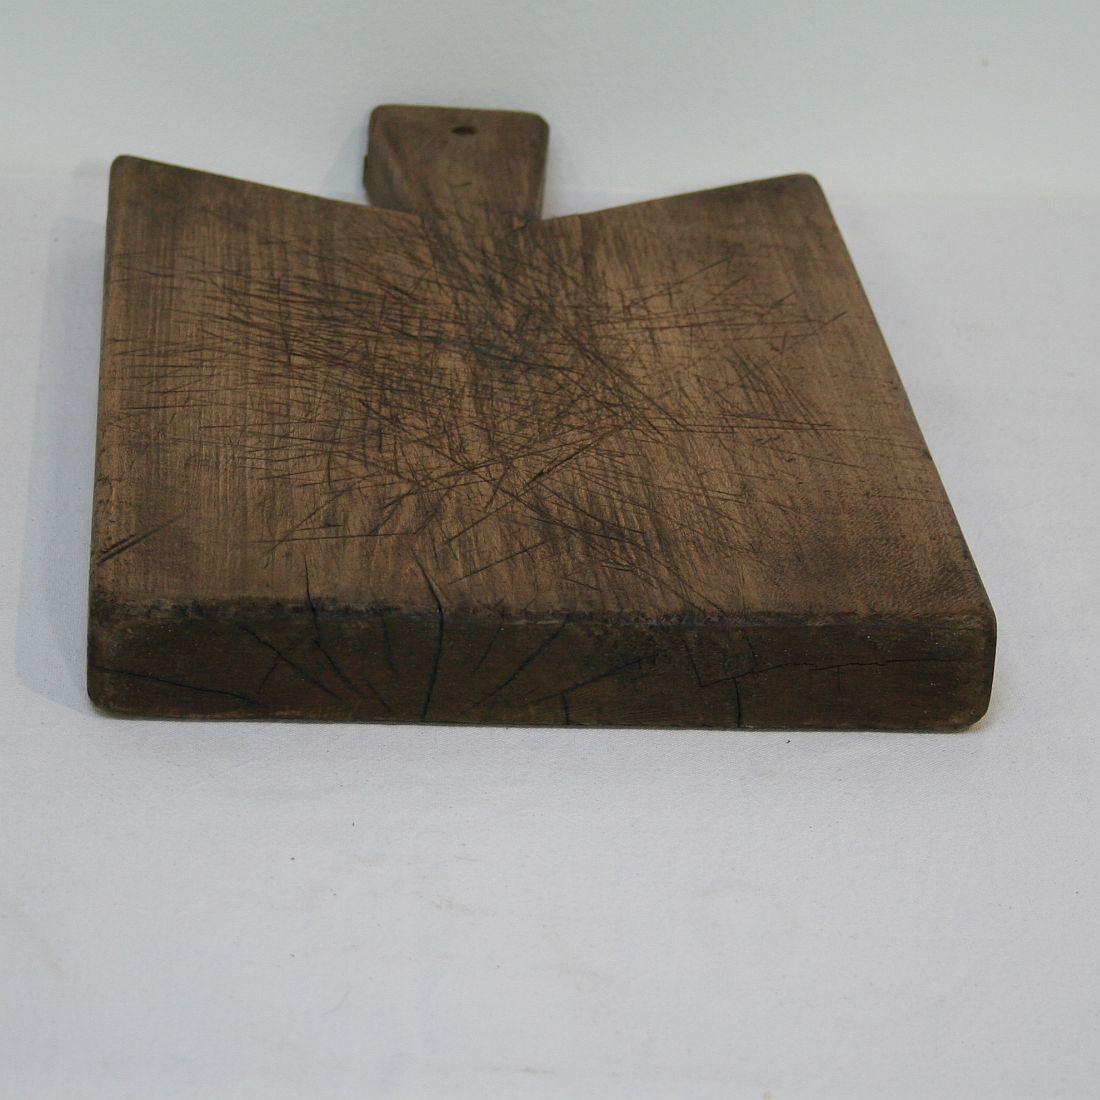 Collection of Three Rare French 19th Century, Wooden Chopping or Cutting Boards 15